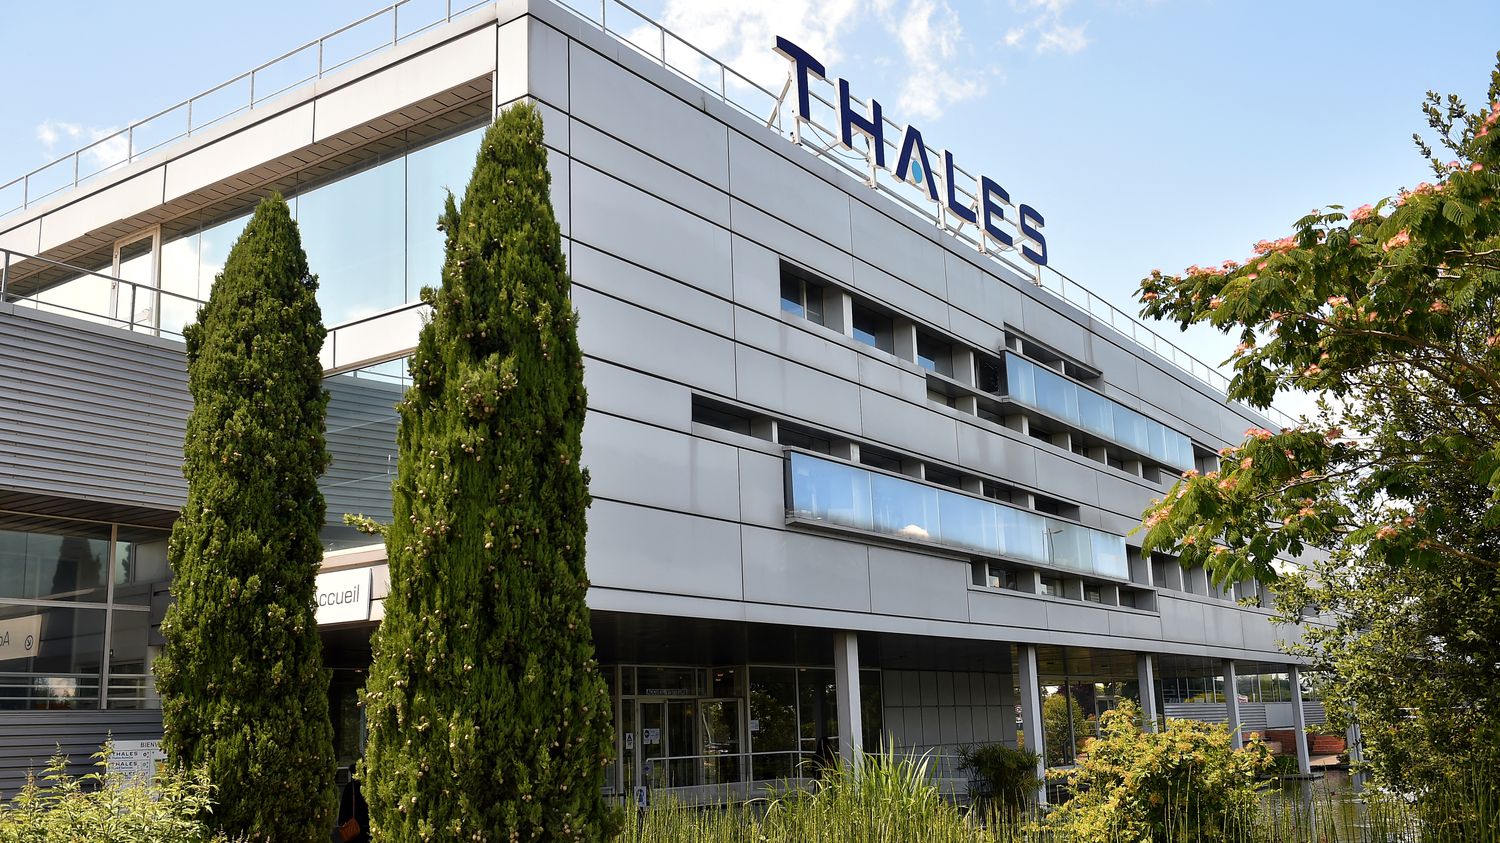 War in Ukraine: the Thales group has delivered kits to Russia until 2019 to assemble infrared cameras
